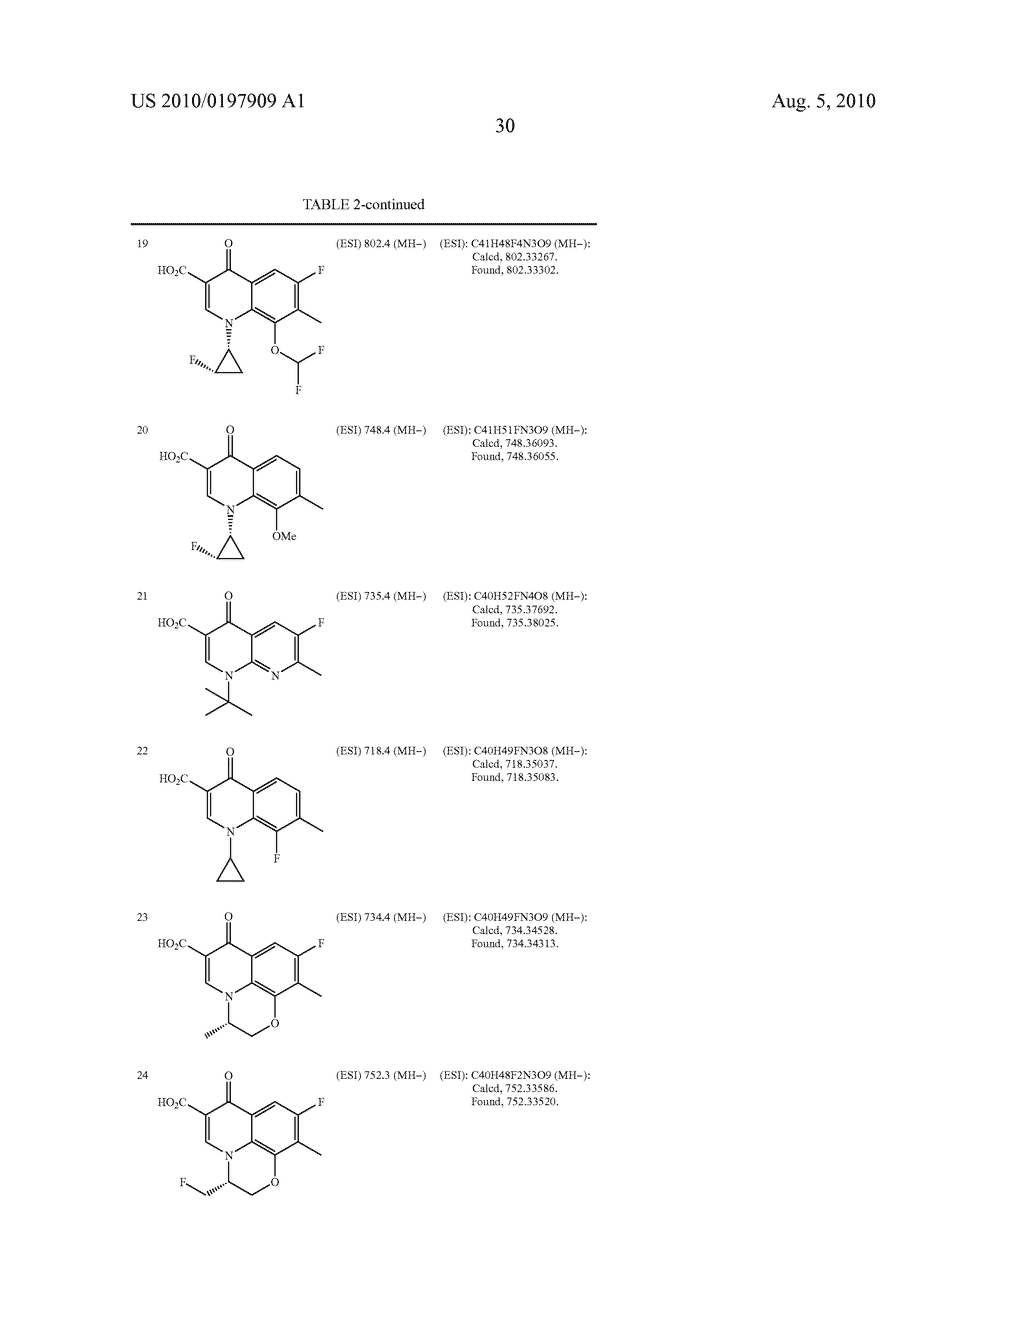 MUTILIN DERIVATIVE HAVING HETEROCYCLIC AROMATIC RING CARBOXYLIC ACID STRUCTURE IN SUBTITUENT AT 14-POSITION - diagram, schematic, and image 31